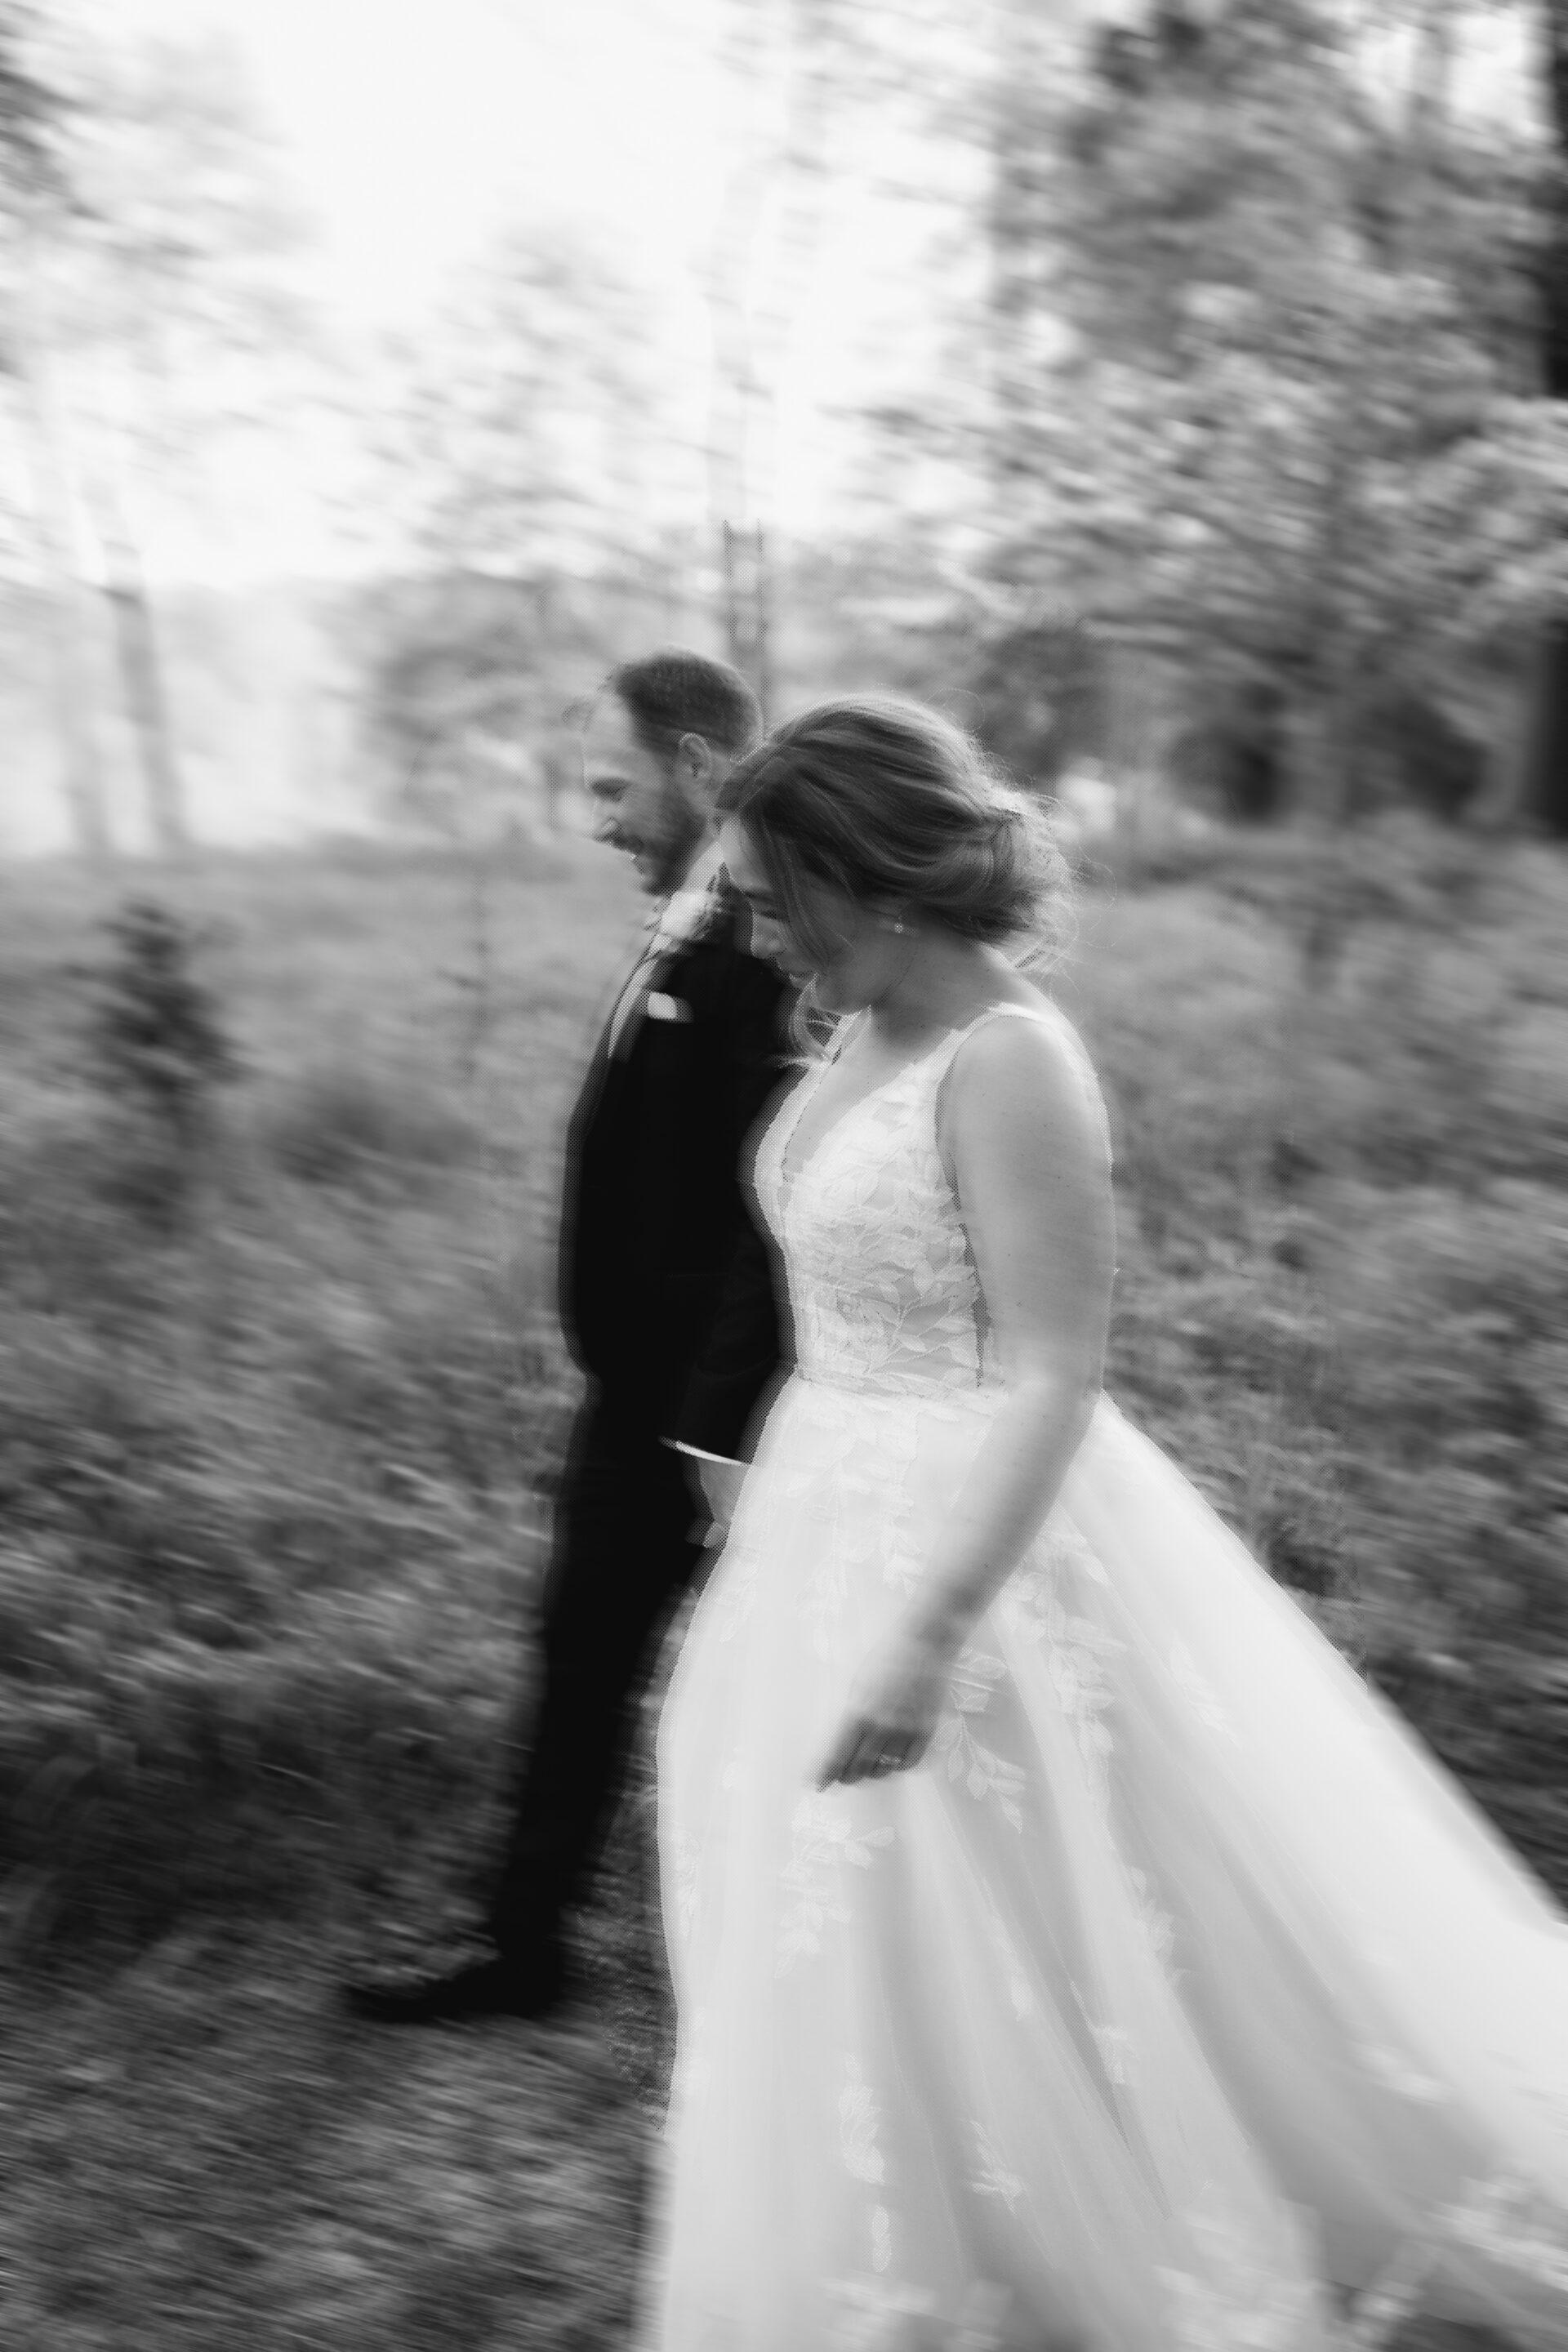 An editorial style shot of the bride and groom at Old Luxters Barn in Oxfordshire